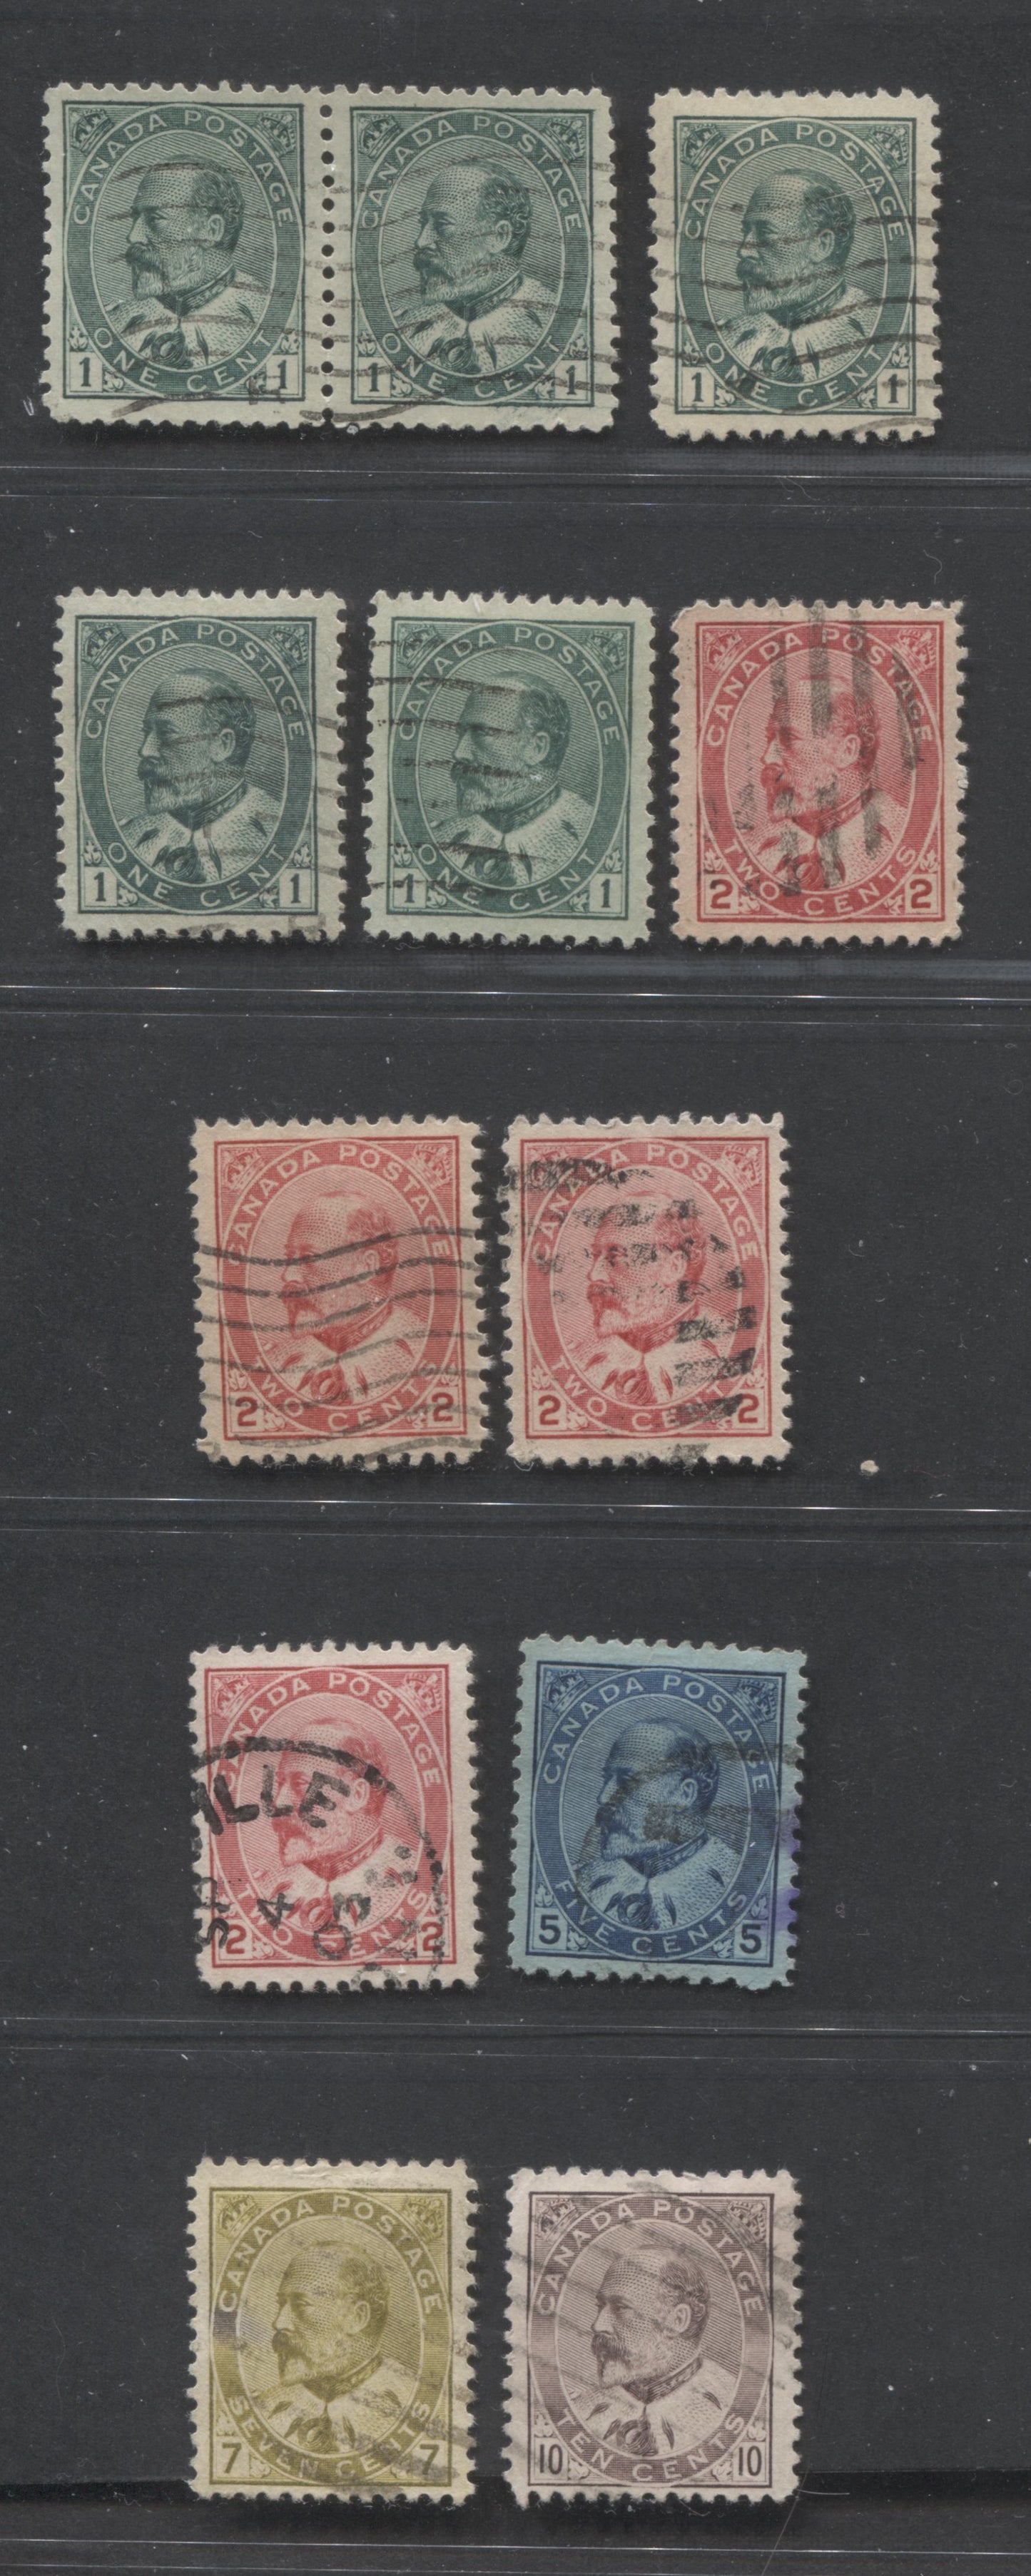 Lot 270 Canada #89iii, 90i, 90e, 91, 92, 93i 1c, 2c, 5c, 7c, 10c Blue Green - Dull Lilac King  Edward VII, 1903-1911 King Edward VII , 12 VF Used Singles, All Slightly Different Shades or Papers, Including Two 2c Type 1's